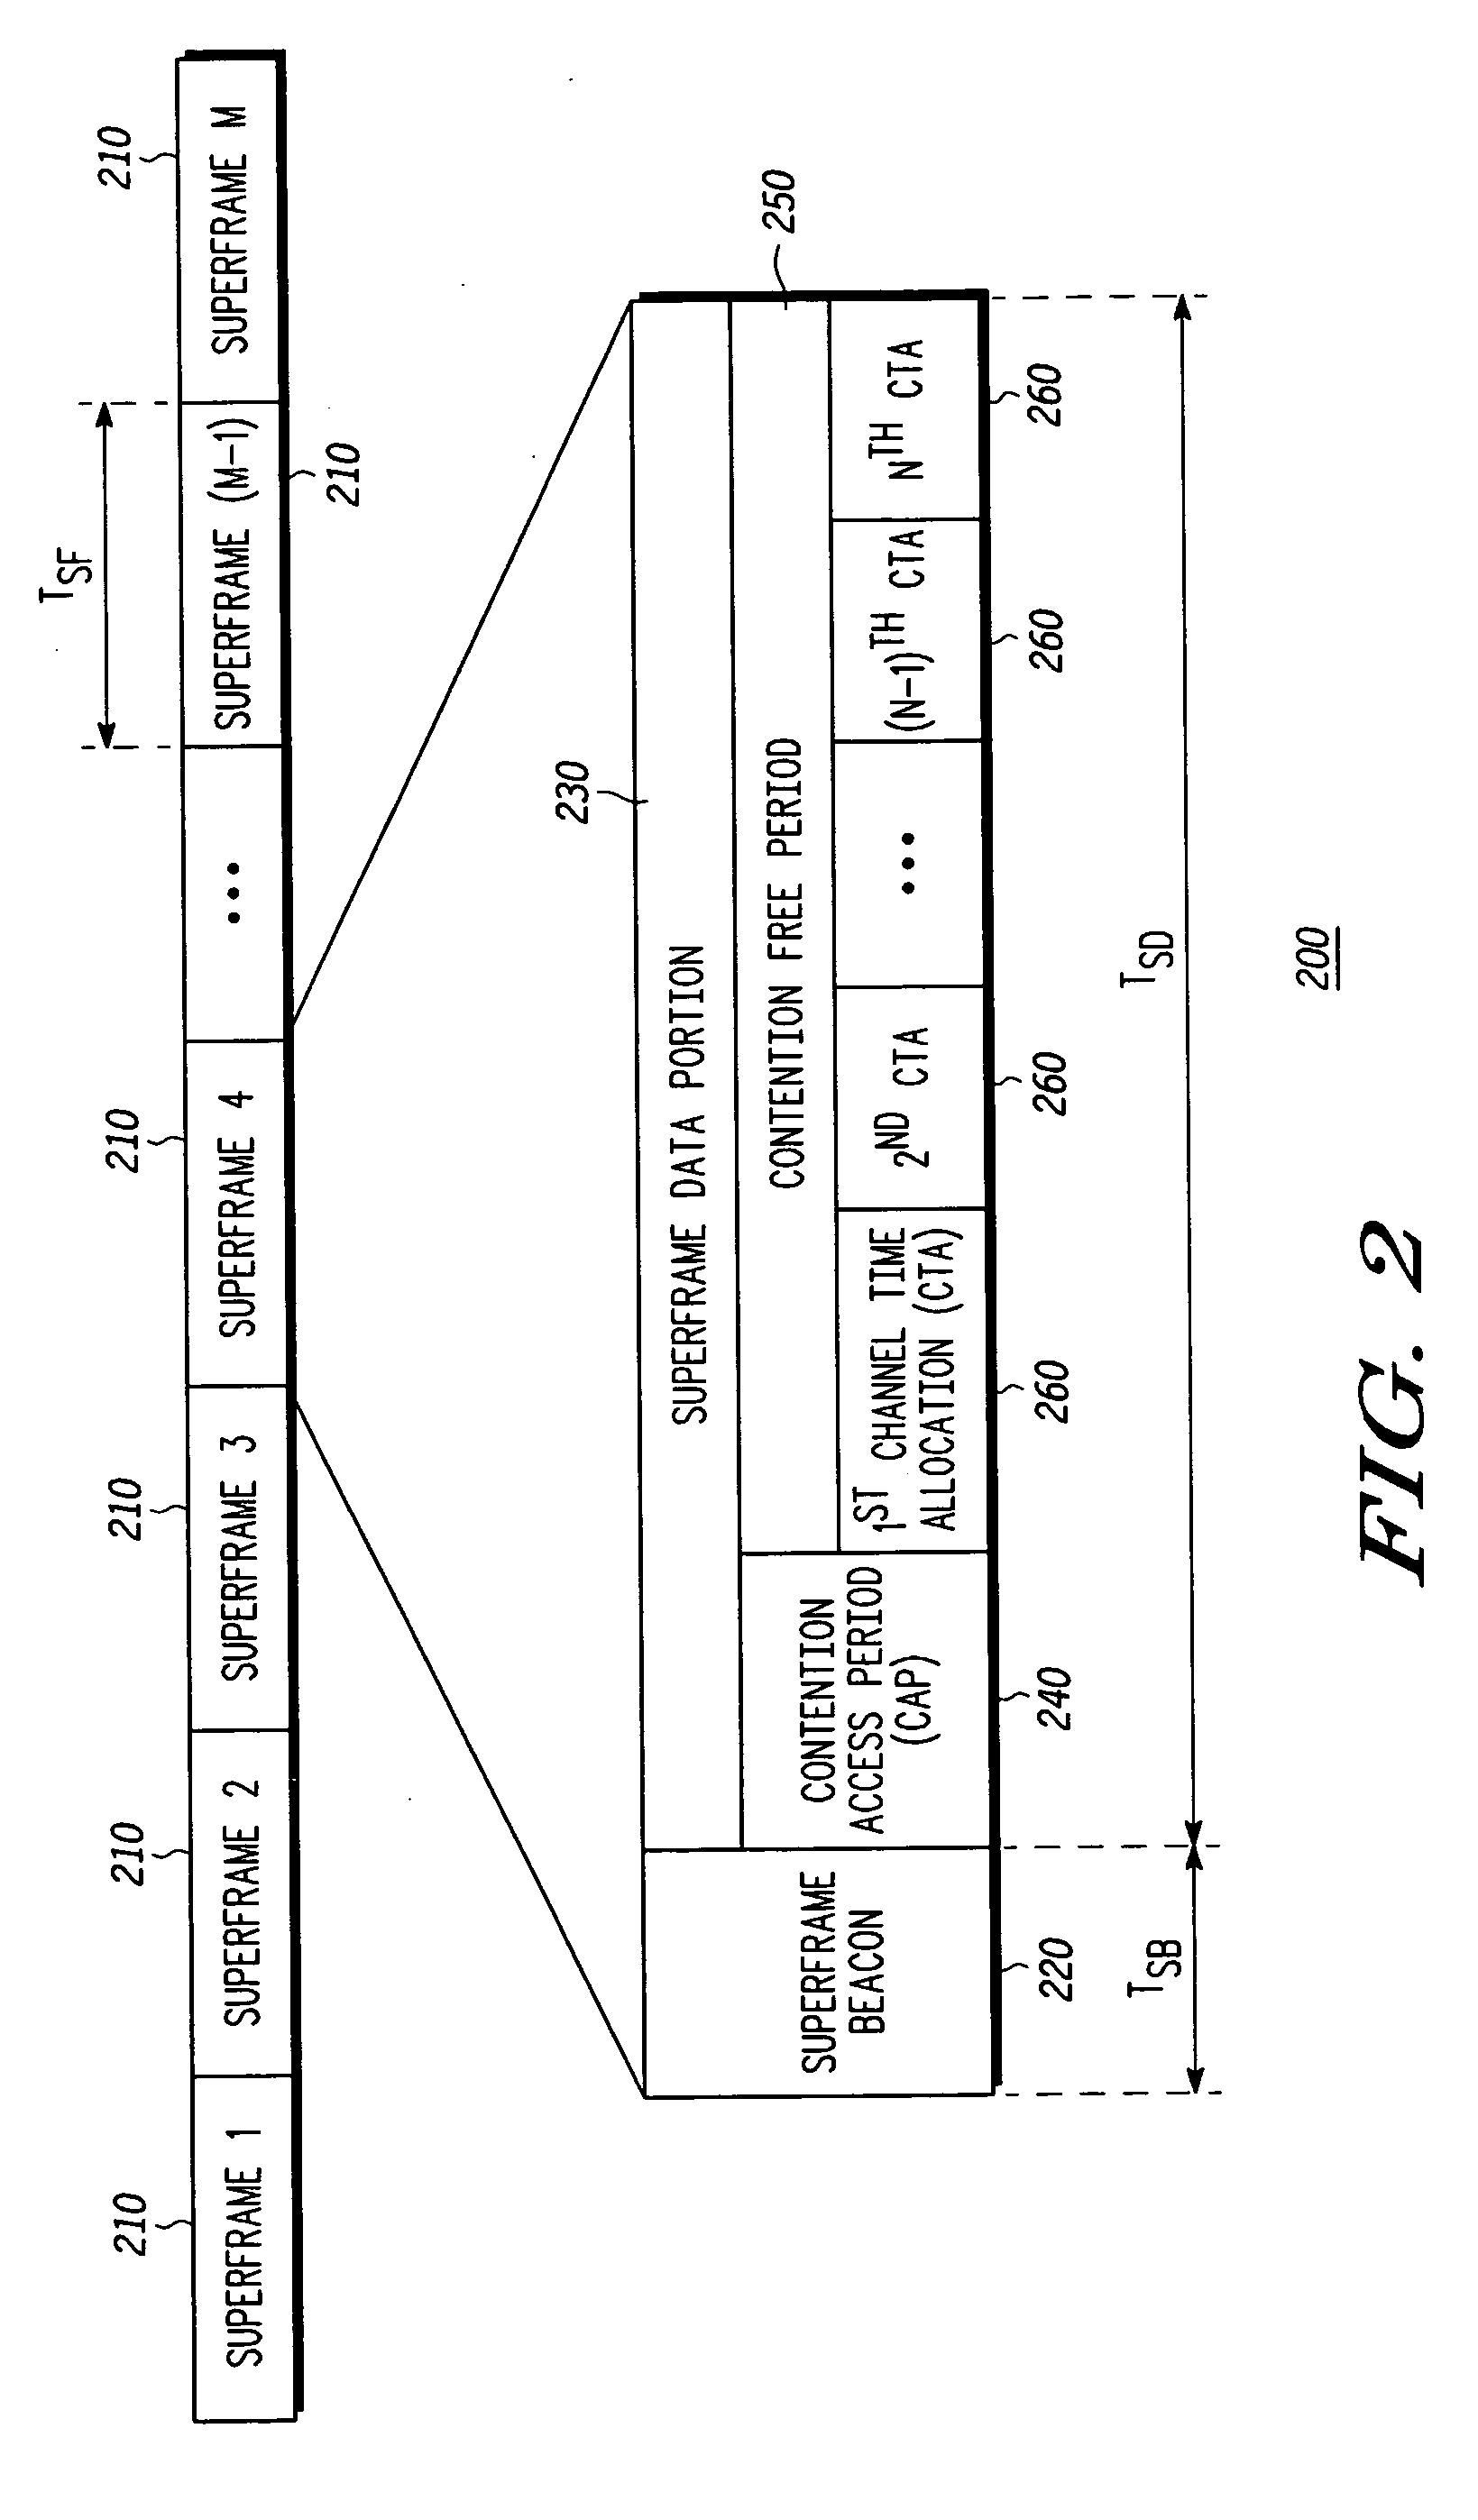 Method of synchronizing a wireless device using an external clock